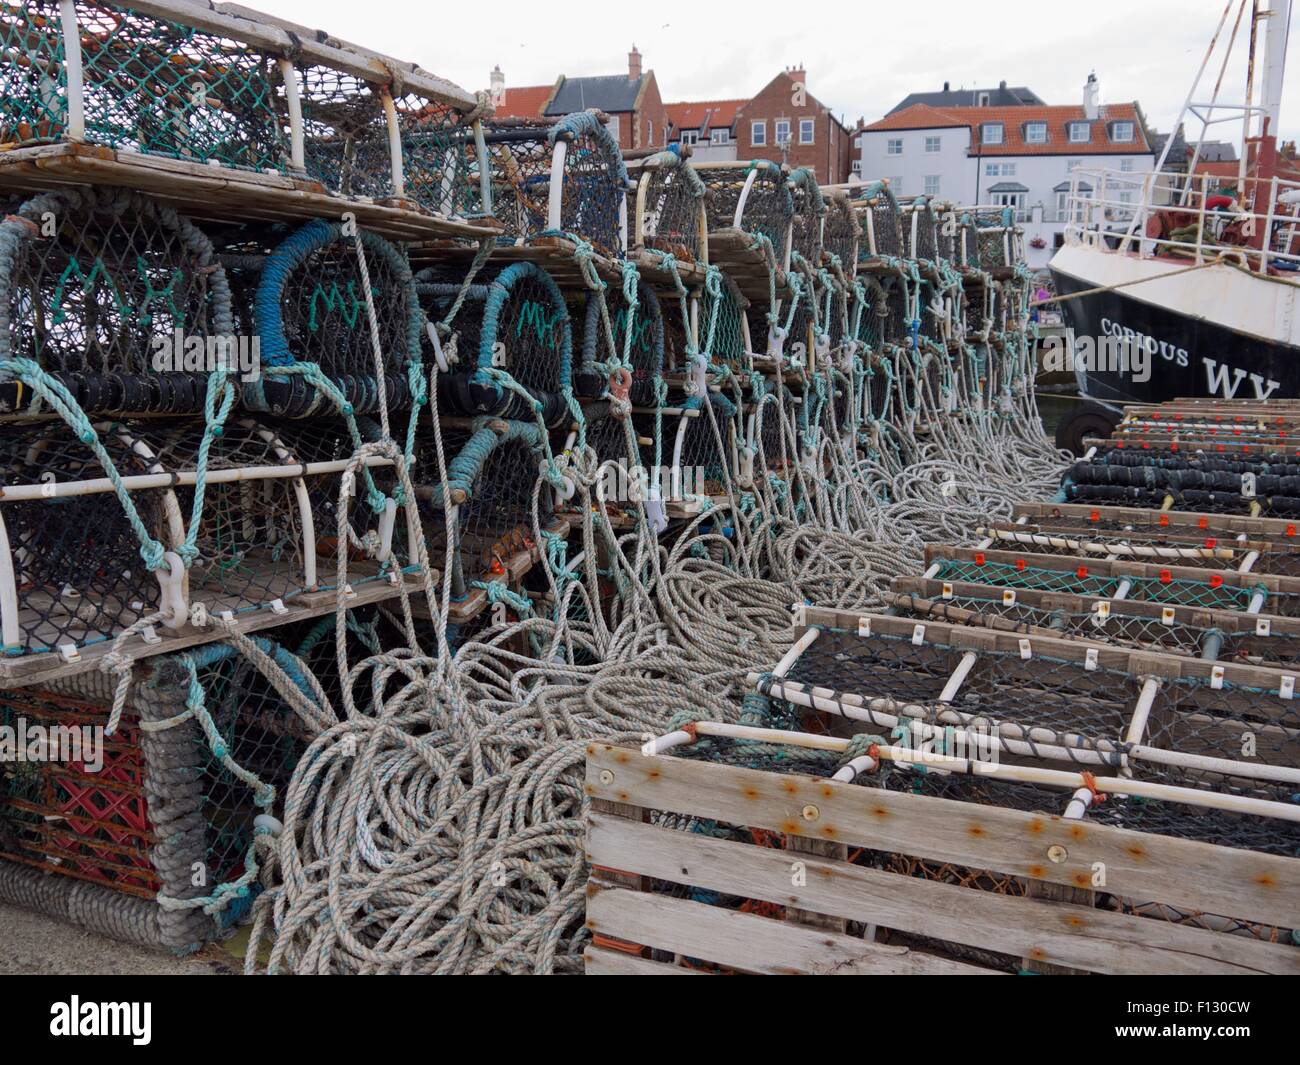 Fishing nets, rope and lobster pots Stock Photo